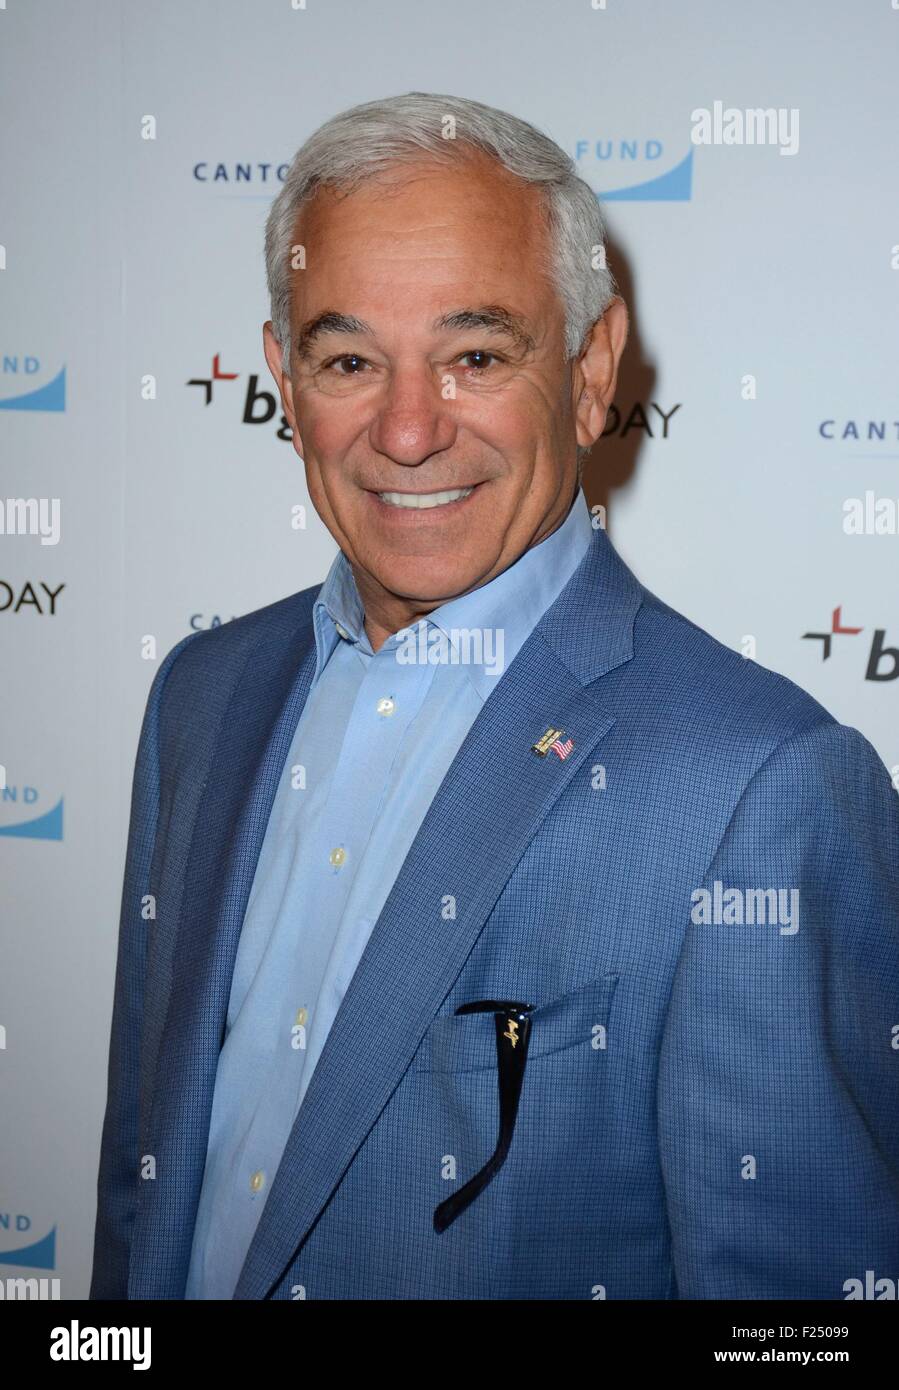 New York, NY, USA. 11th Sep, 2015. Bobby Valentine, NY Mets in attendance for BGC Partners Annual Charity Day, BGC Partners downtown Manhattan, New York, NY September 11, 2015. Credit:  Derek Storm/Everett Collection/Alamy Live News Stock Photo